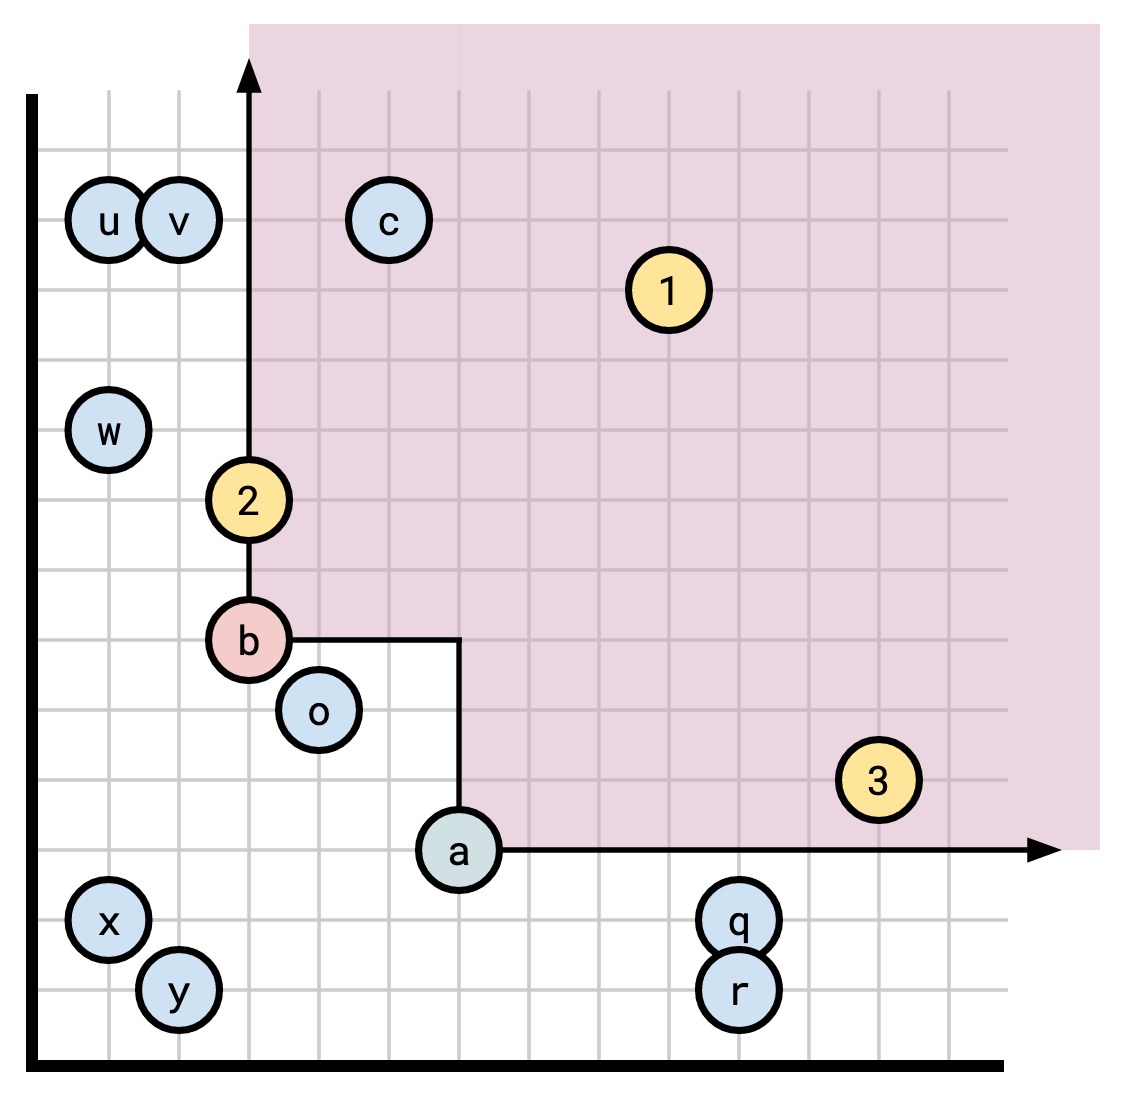 A set of points along with a frontier